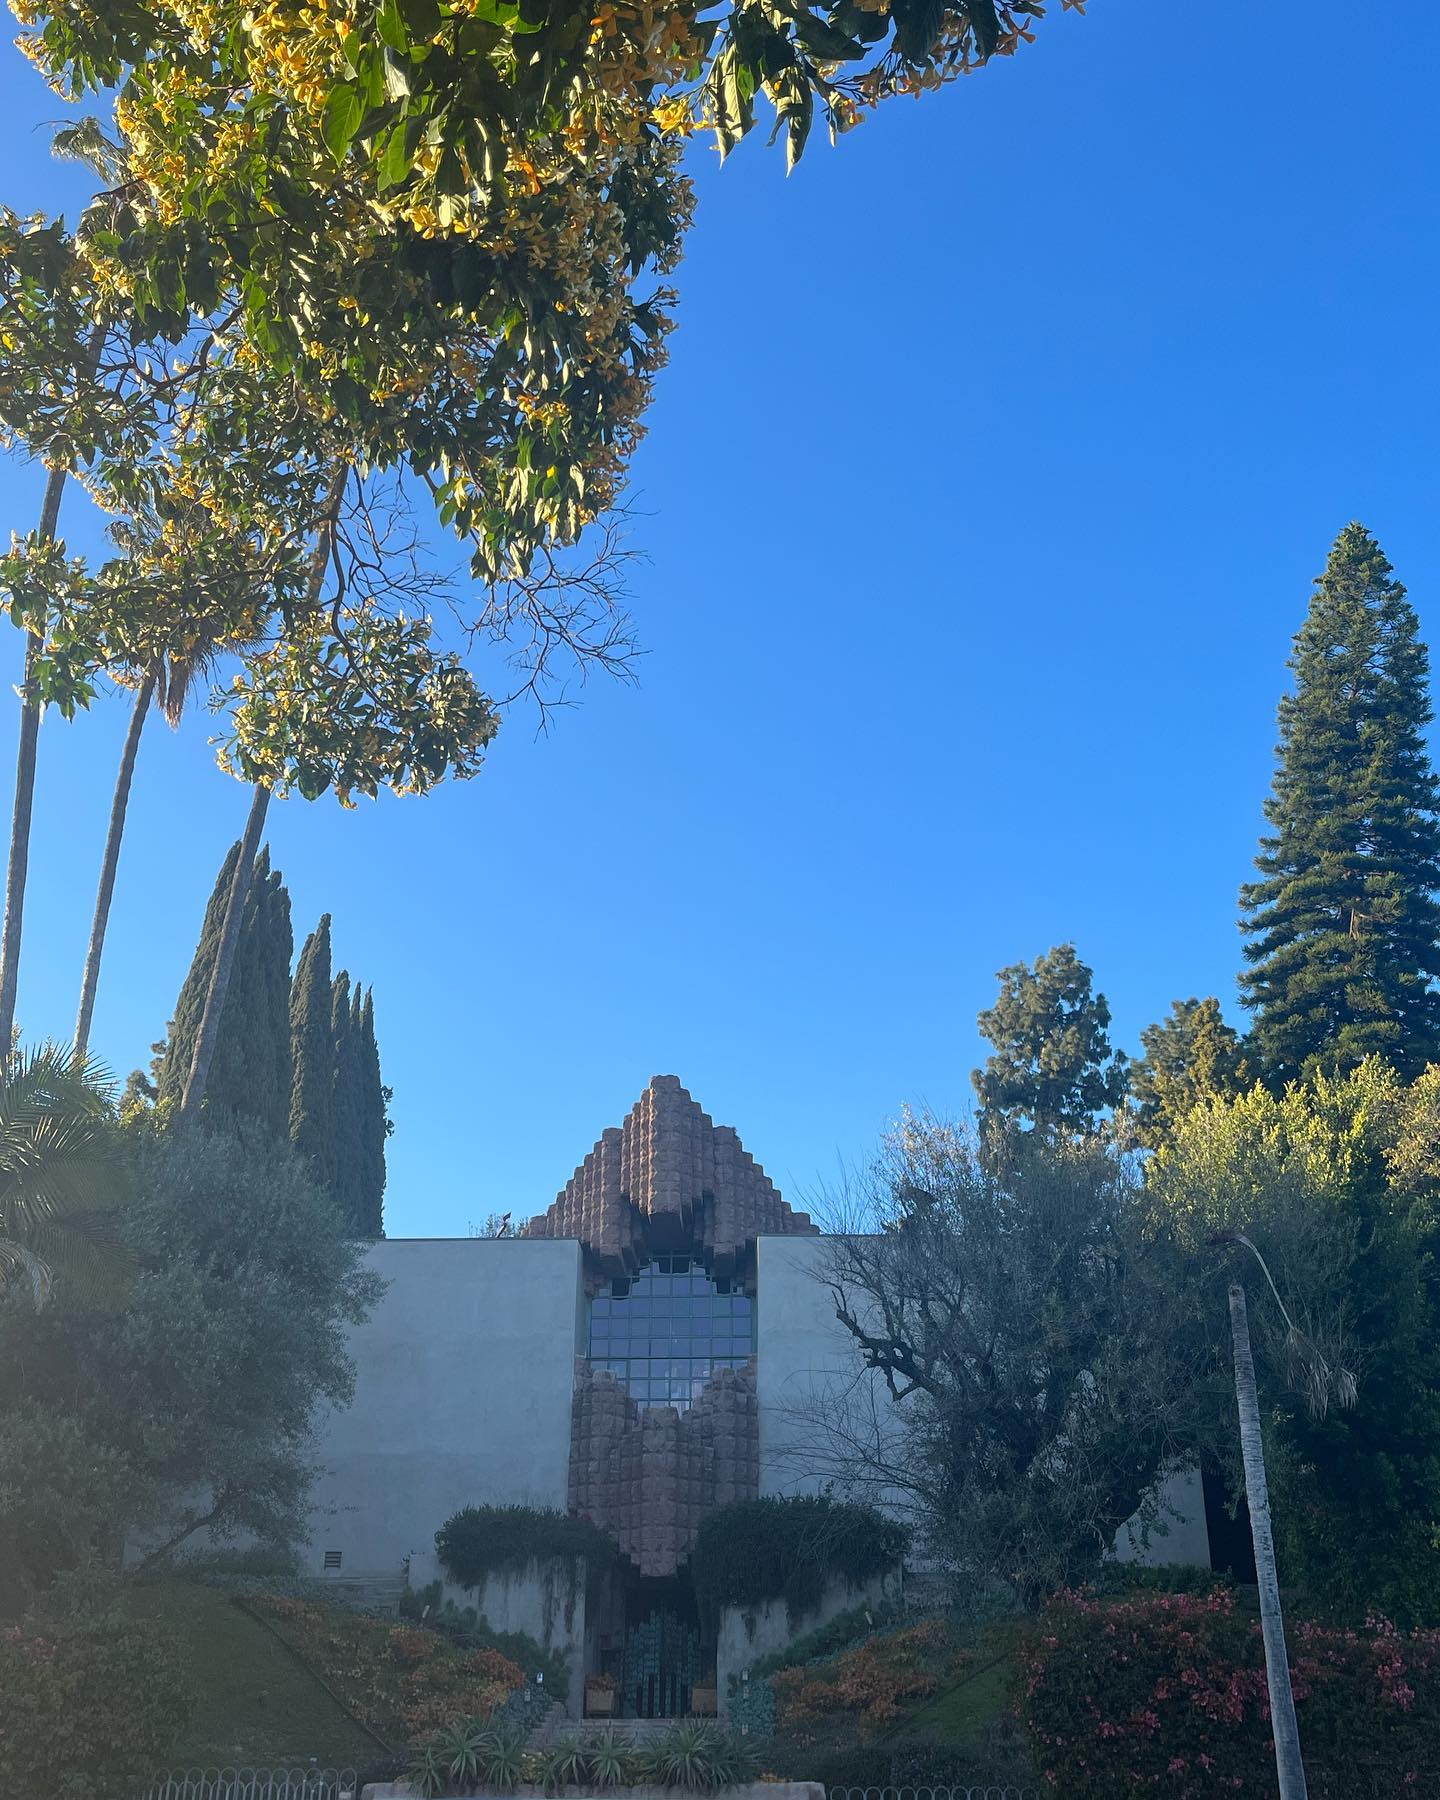 Beverly Hills obelisk, mural on Western Ave, Geoffrey Holder ‘Girl by Window’, Christopher Mudget on Fountain Ave, Virgil Village house, Frank Lloyd Wright ‘Sowden House’, FLW ‘Hollyhock House’, my neighbor, my apartment & knees